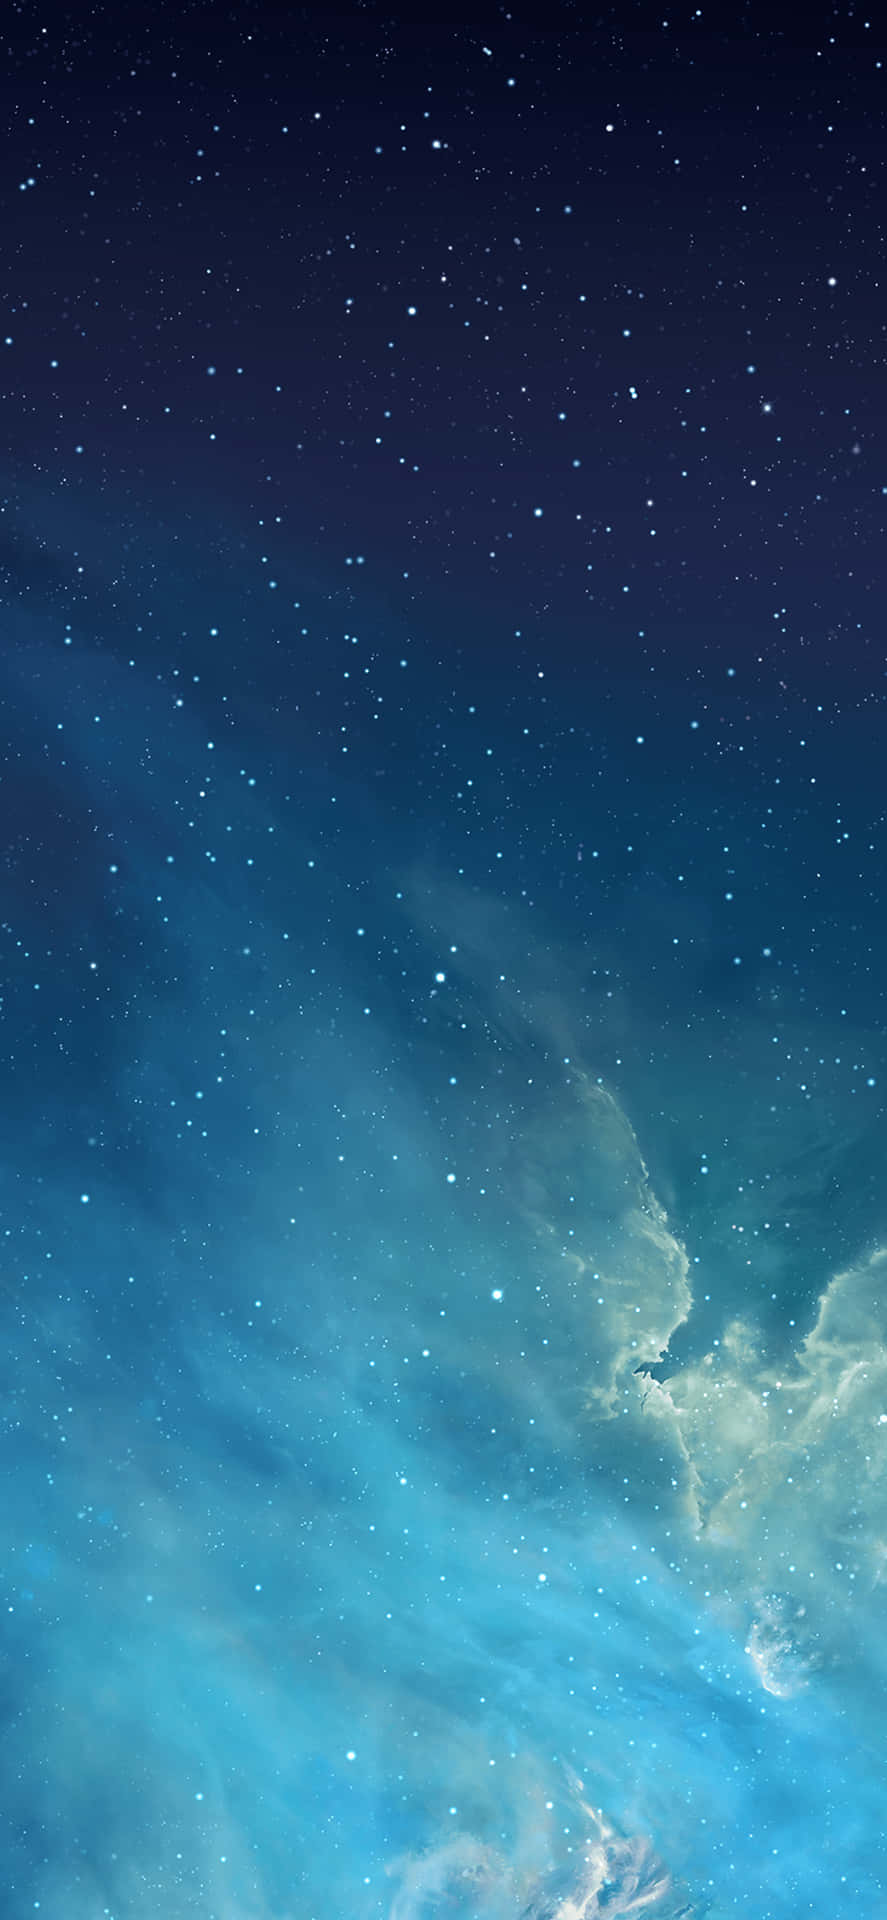 Starry Blue Sky iPhone Classic Wallpaper